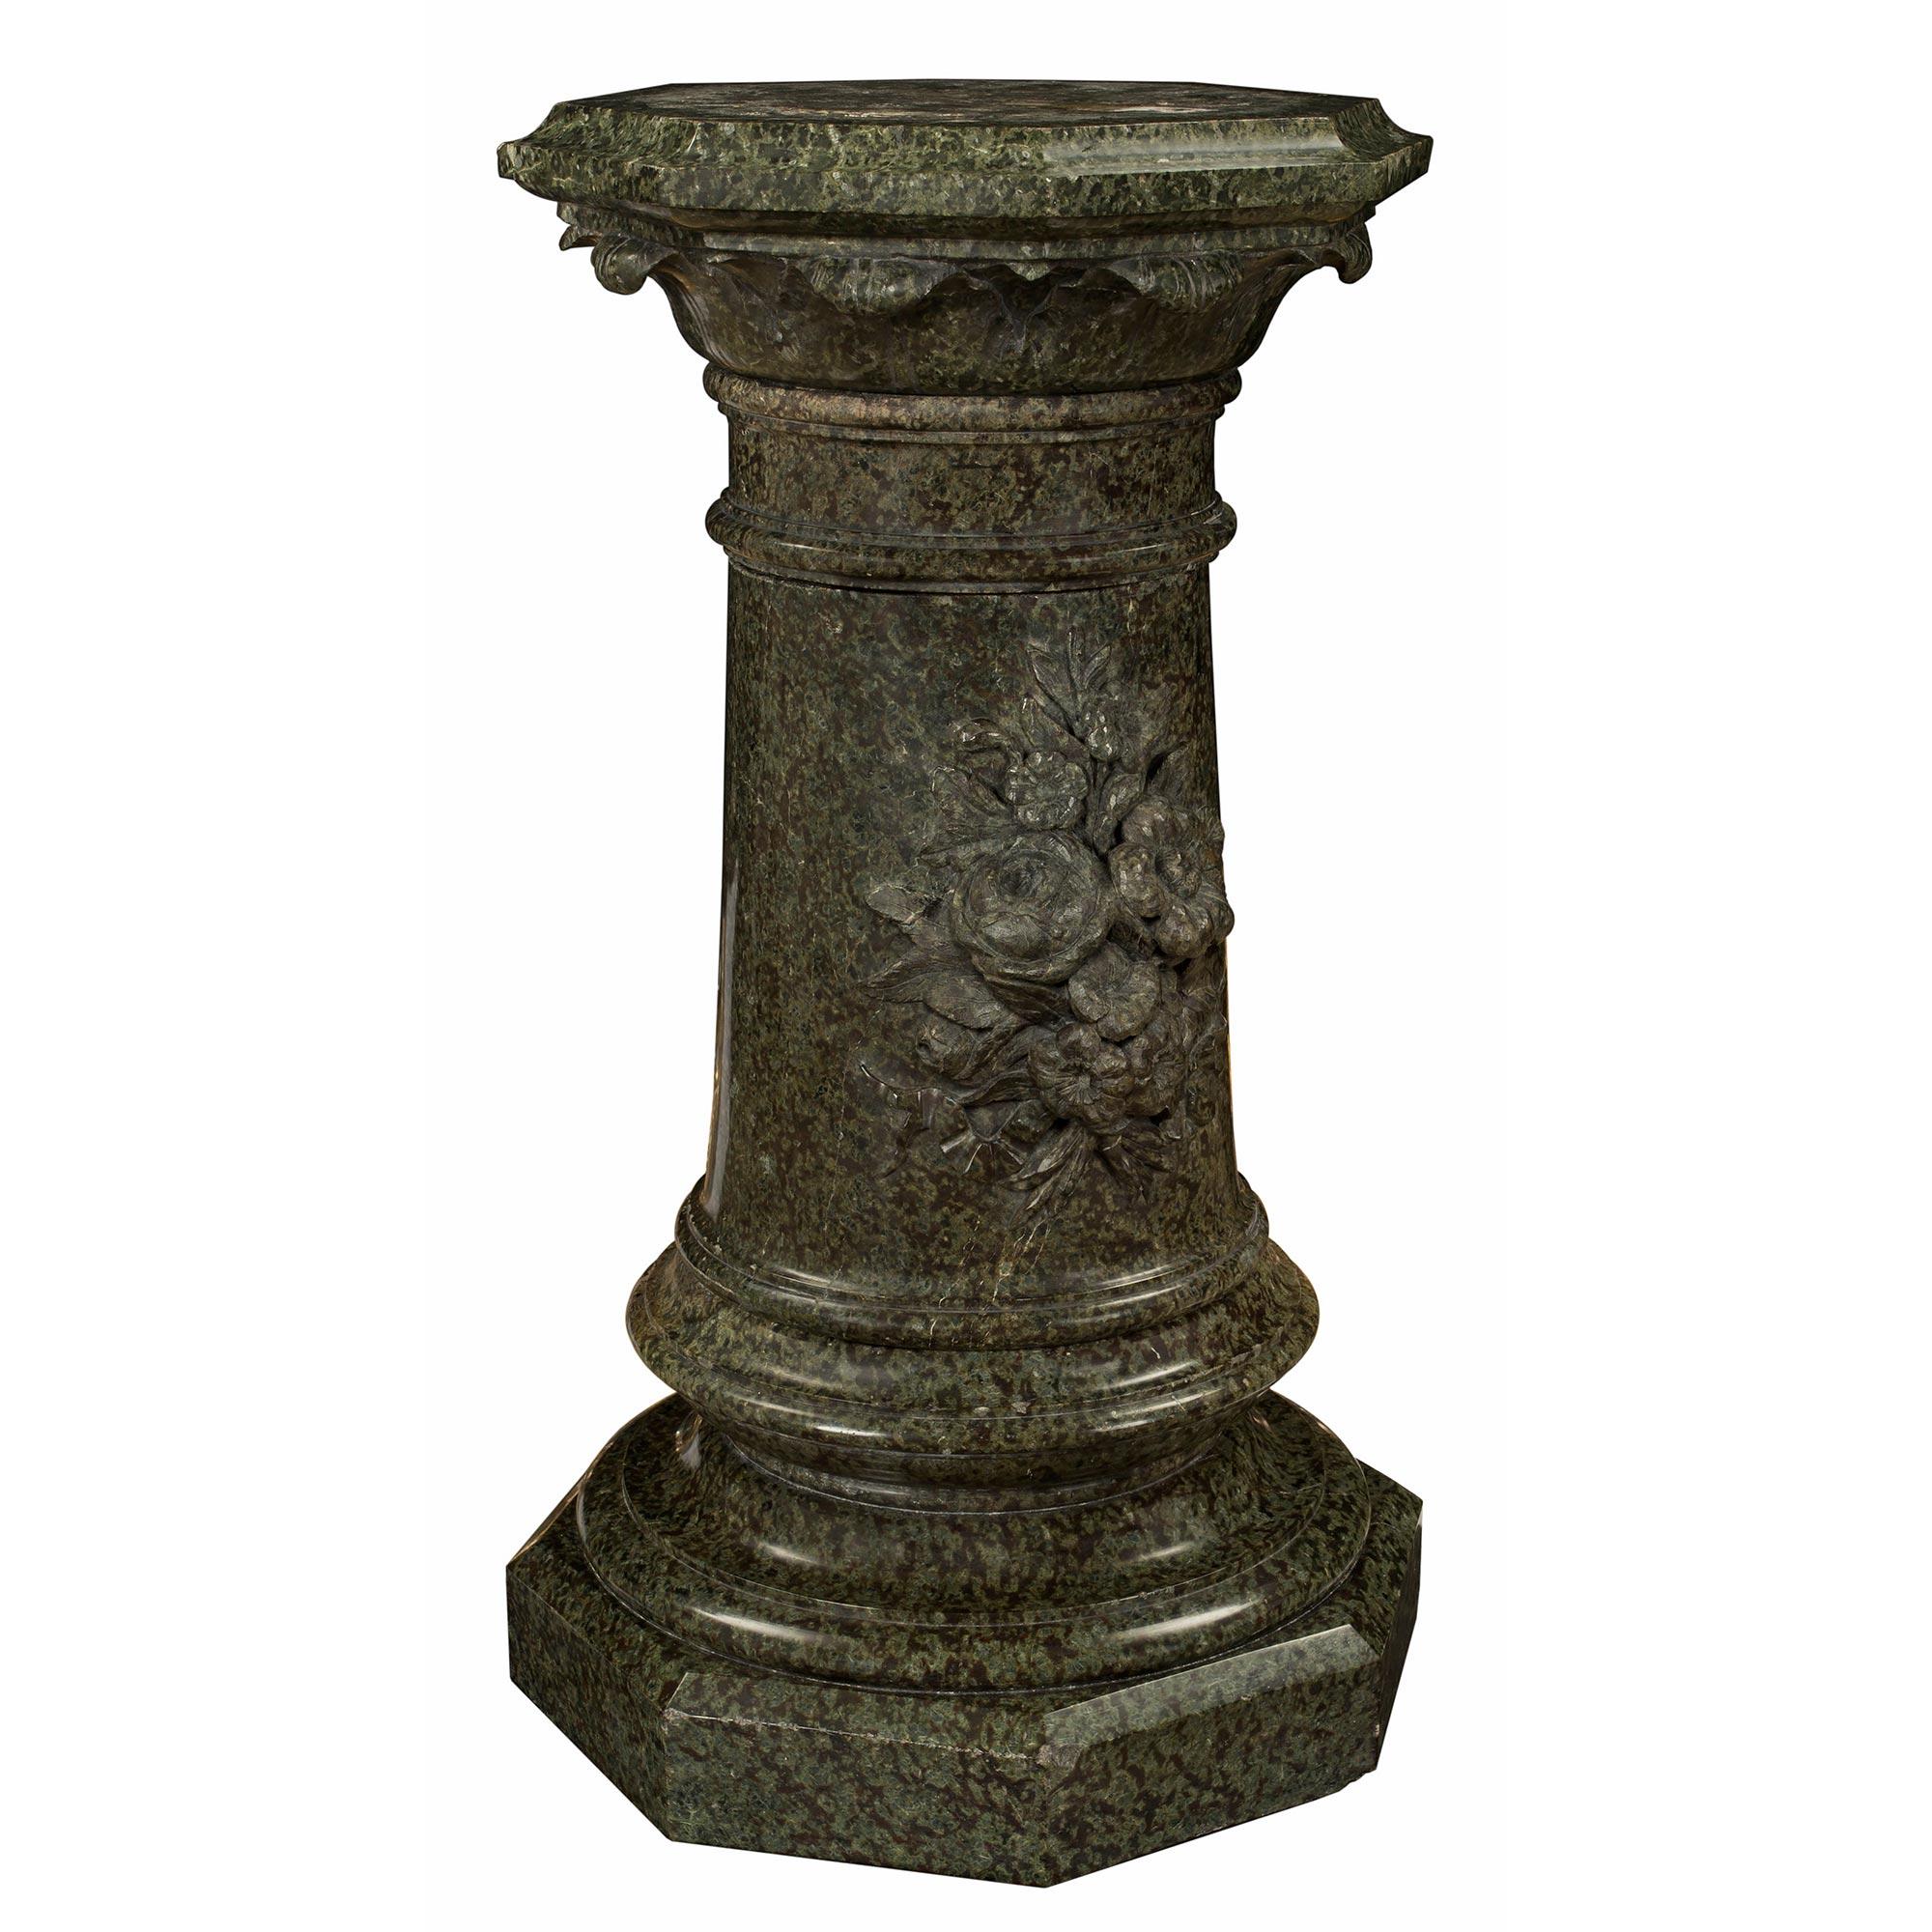 A striking Italian 19th century Louis XVI st. marble pedestal column. The most decorative pedestal is raised by an octagonal base below a circular mottled border. The circular central support displays beautiful and richly carved flowers at the front